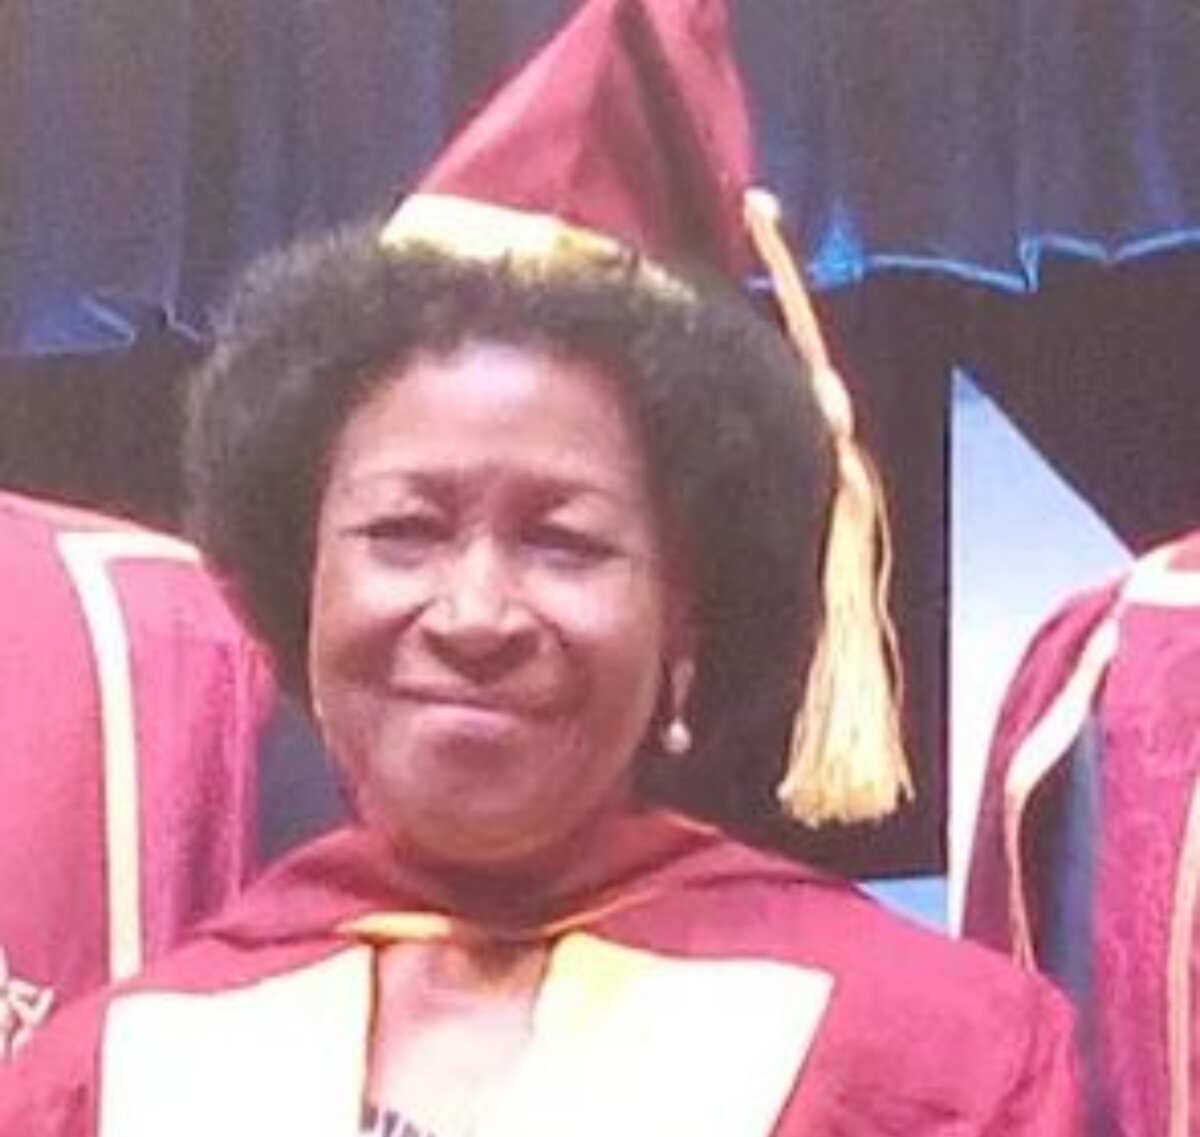 Not too old to learn - 77-year-old woman graduates from Unilag